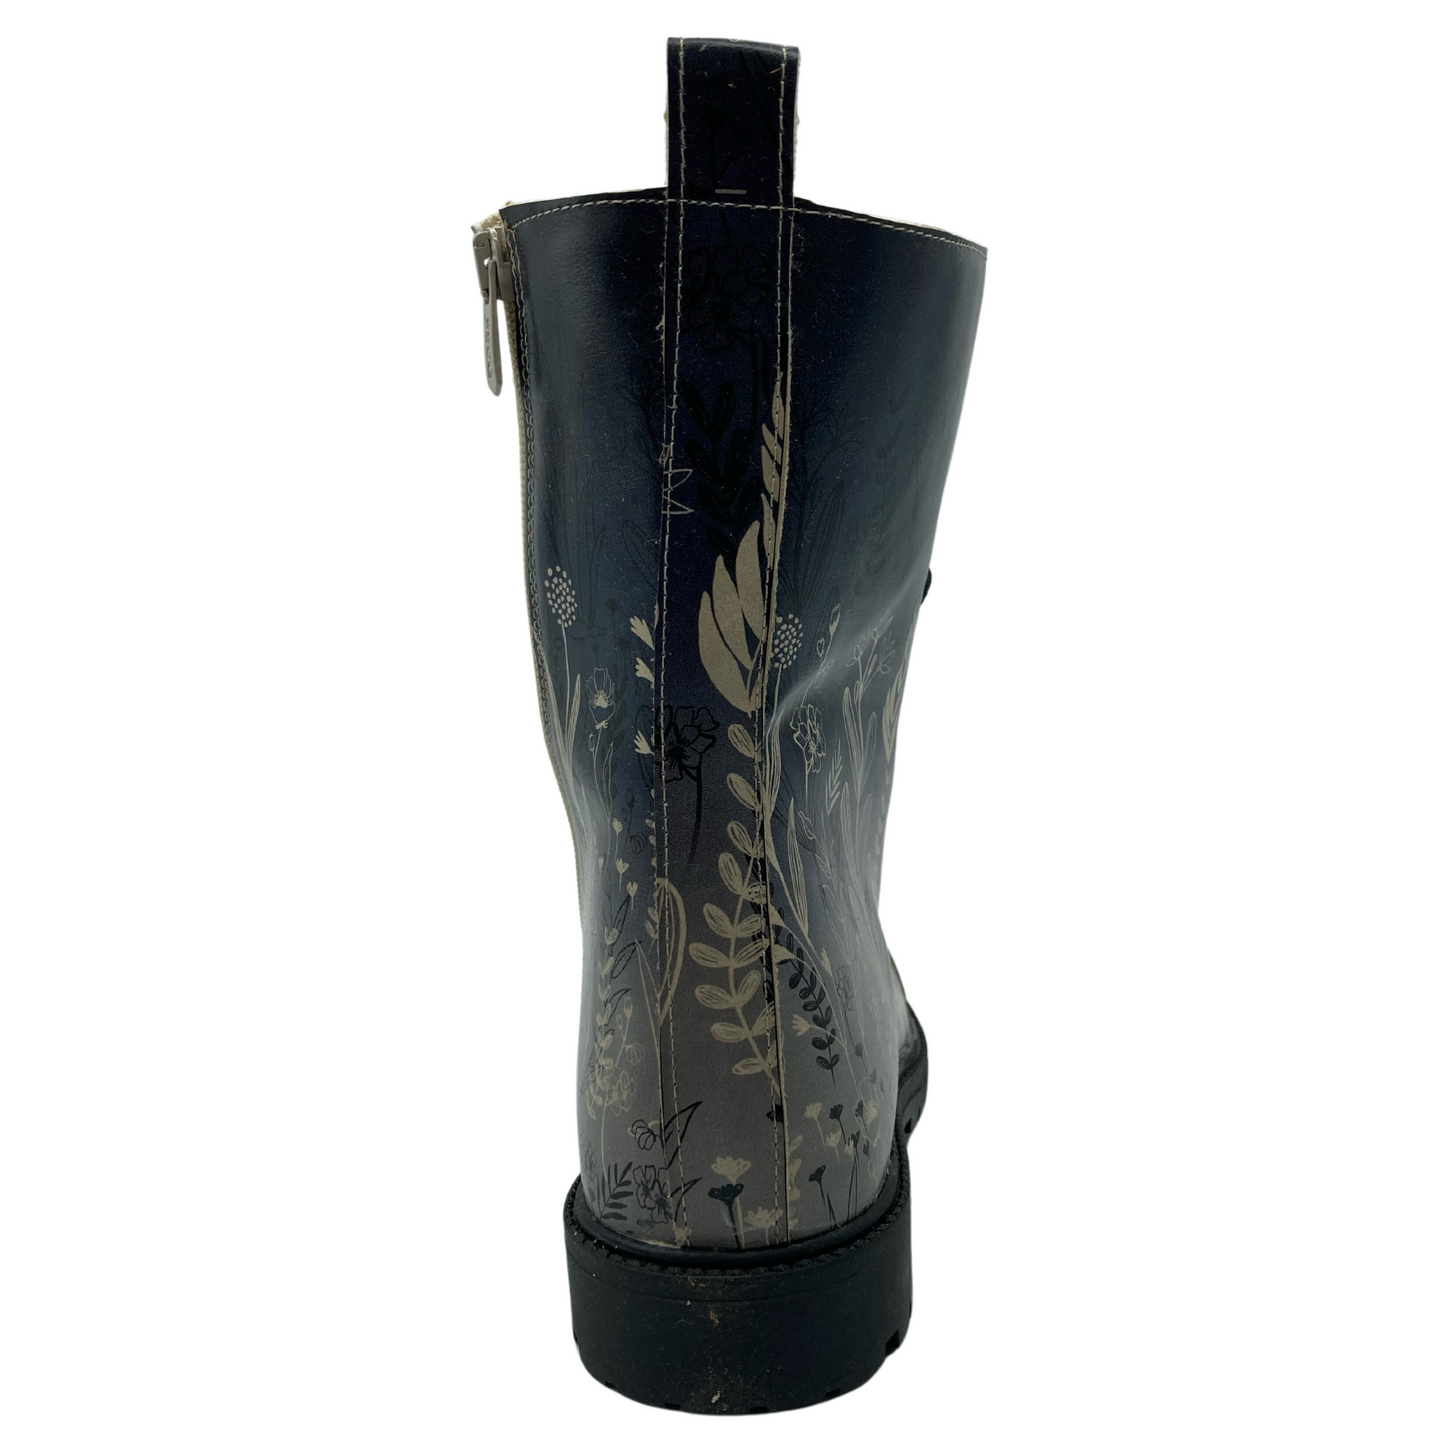 Back view of vegan leather combat boot with ombre floral pattern and black outsole